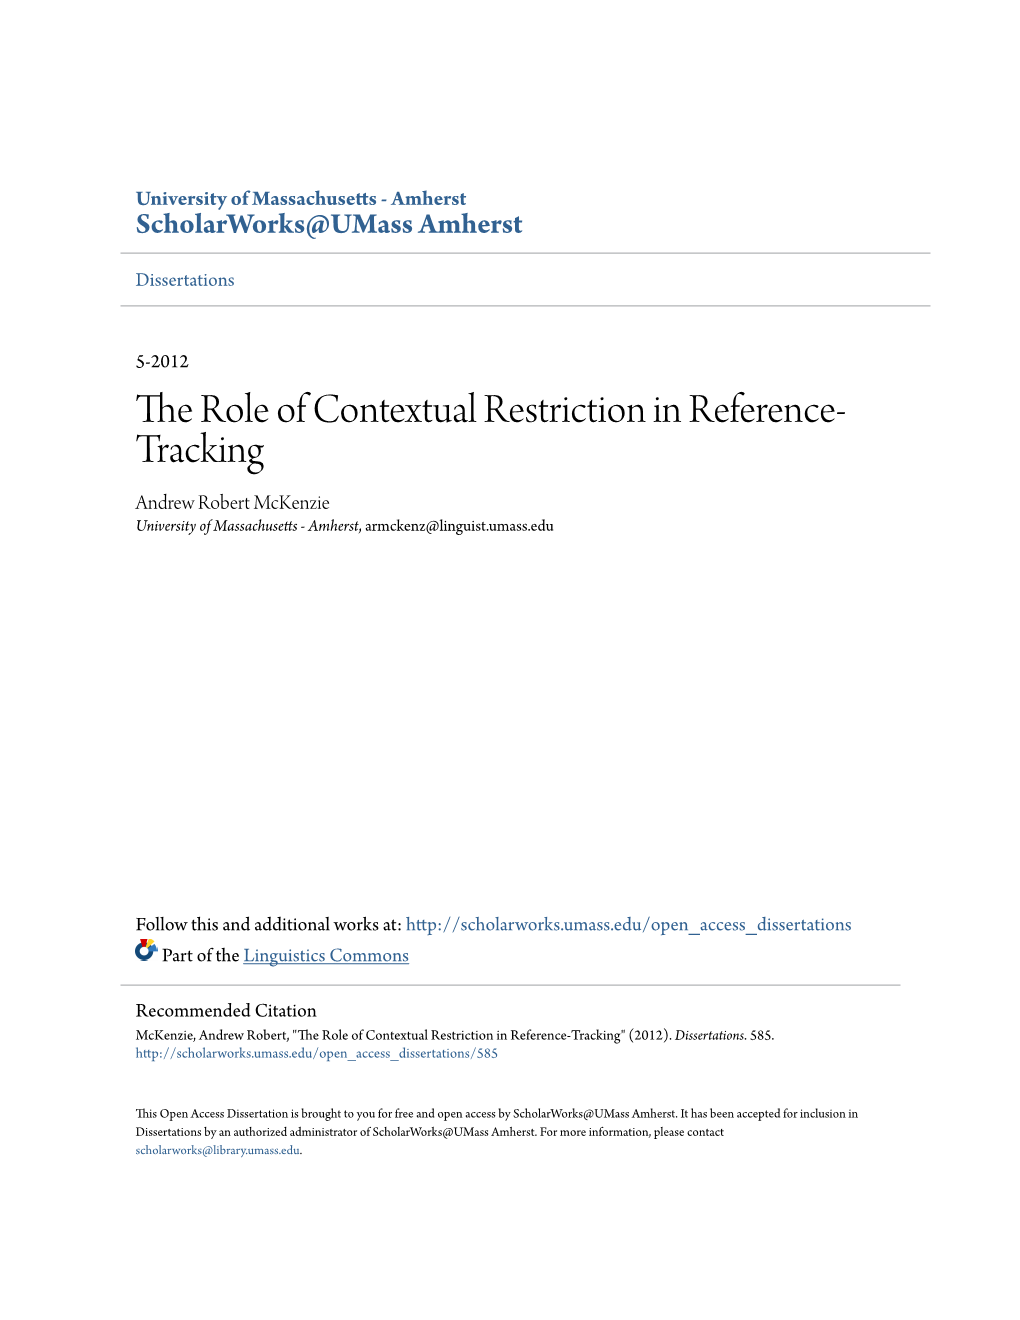 The Role of Contextual Restriction in Reference-Tracking" (2012)